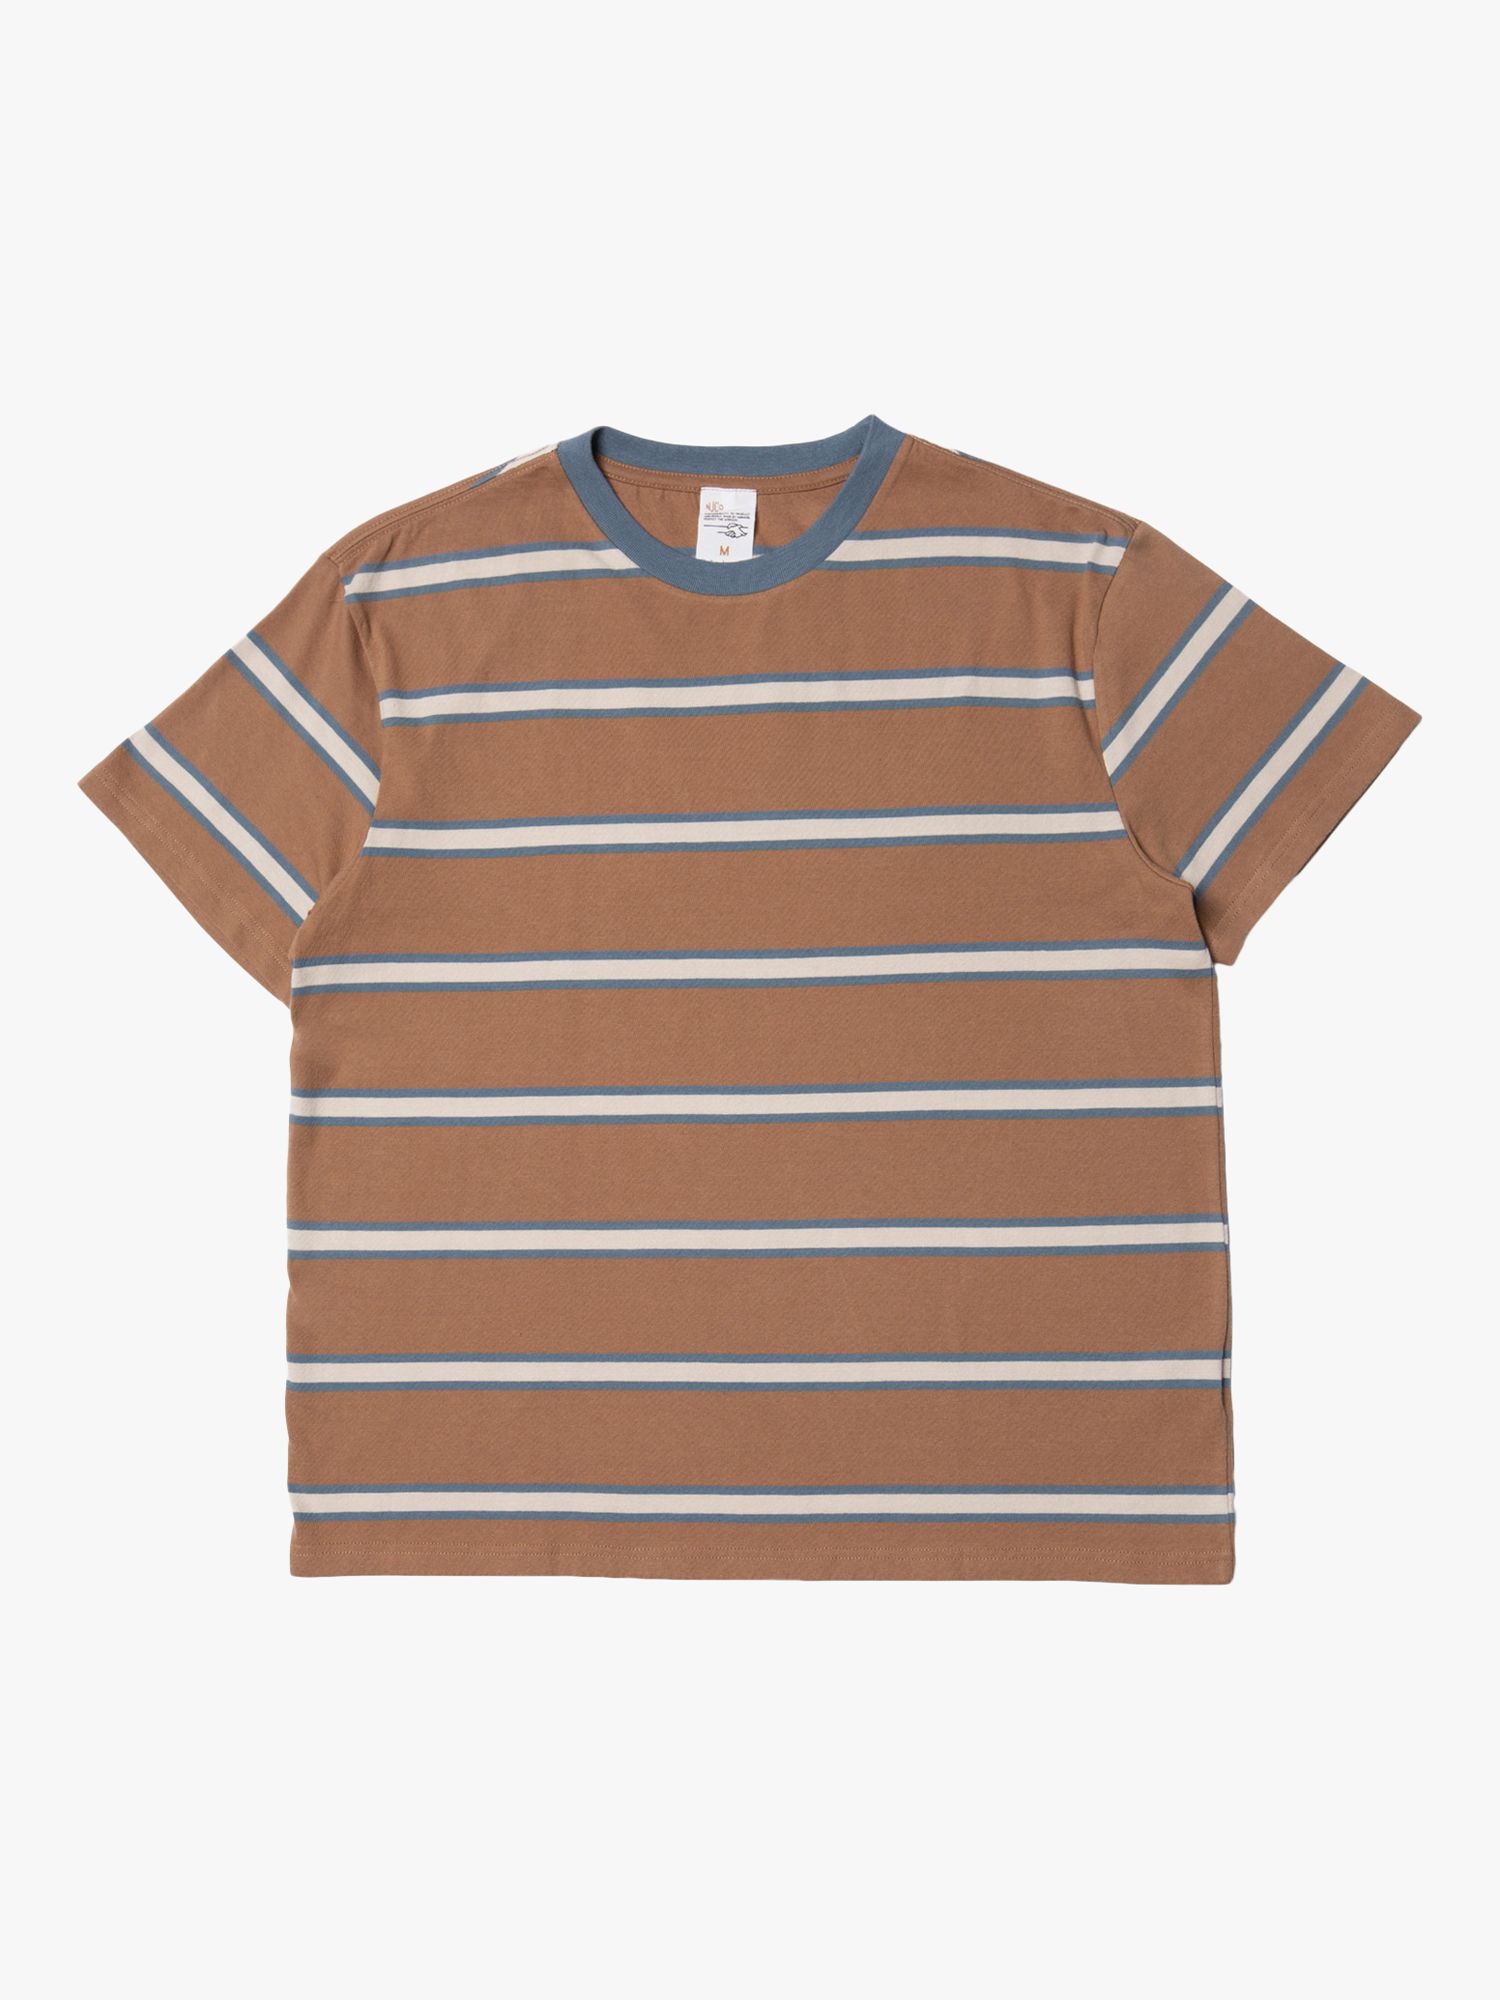 Buy Nudie Jeans Leffe Stripe T-Shirt, Brown/White Online at johnlewis.com